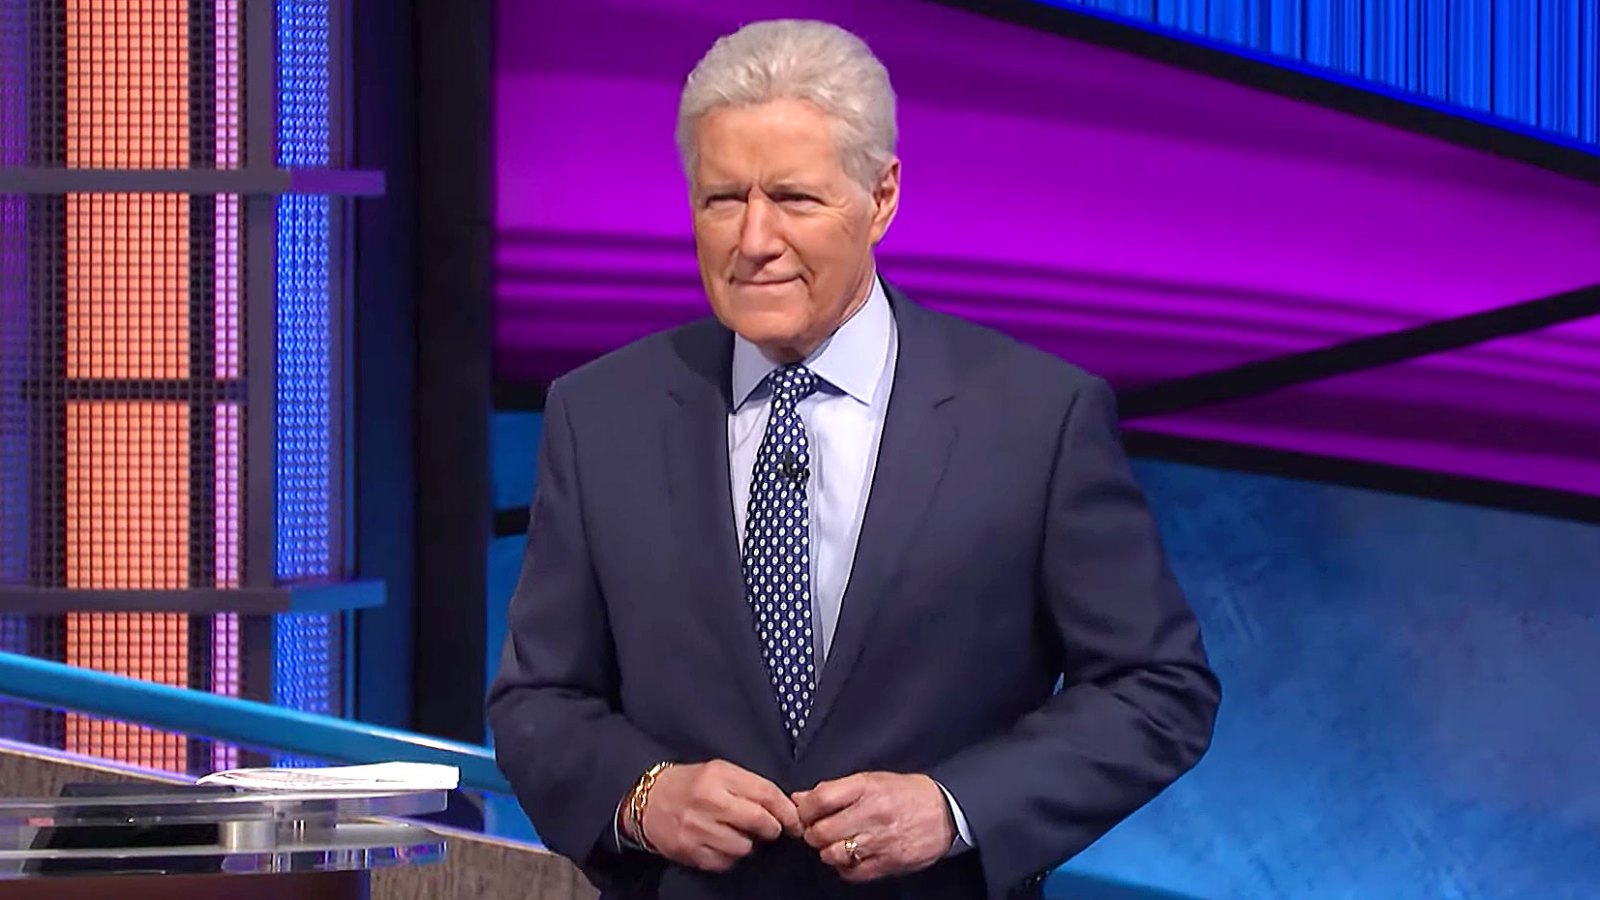 Alex Trebek Reveals Hes On the Mend After Cancer Diagnosis